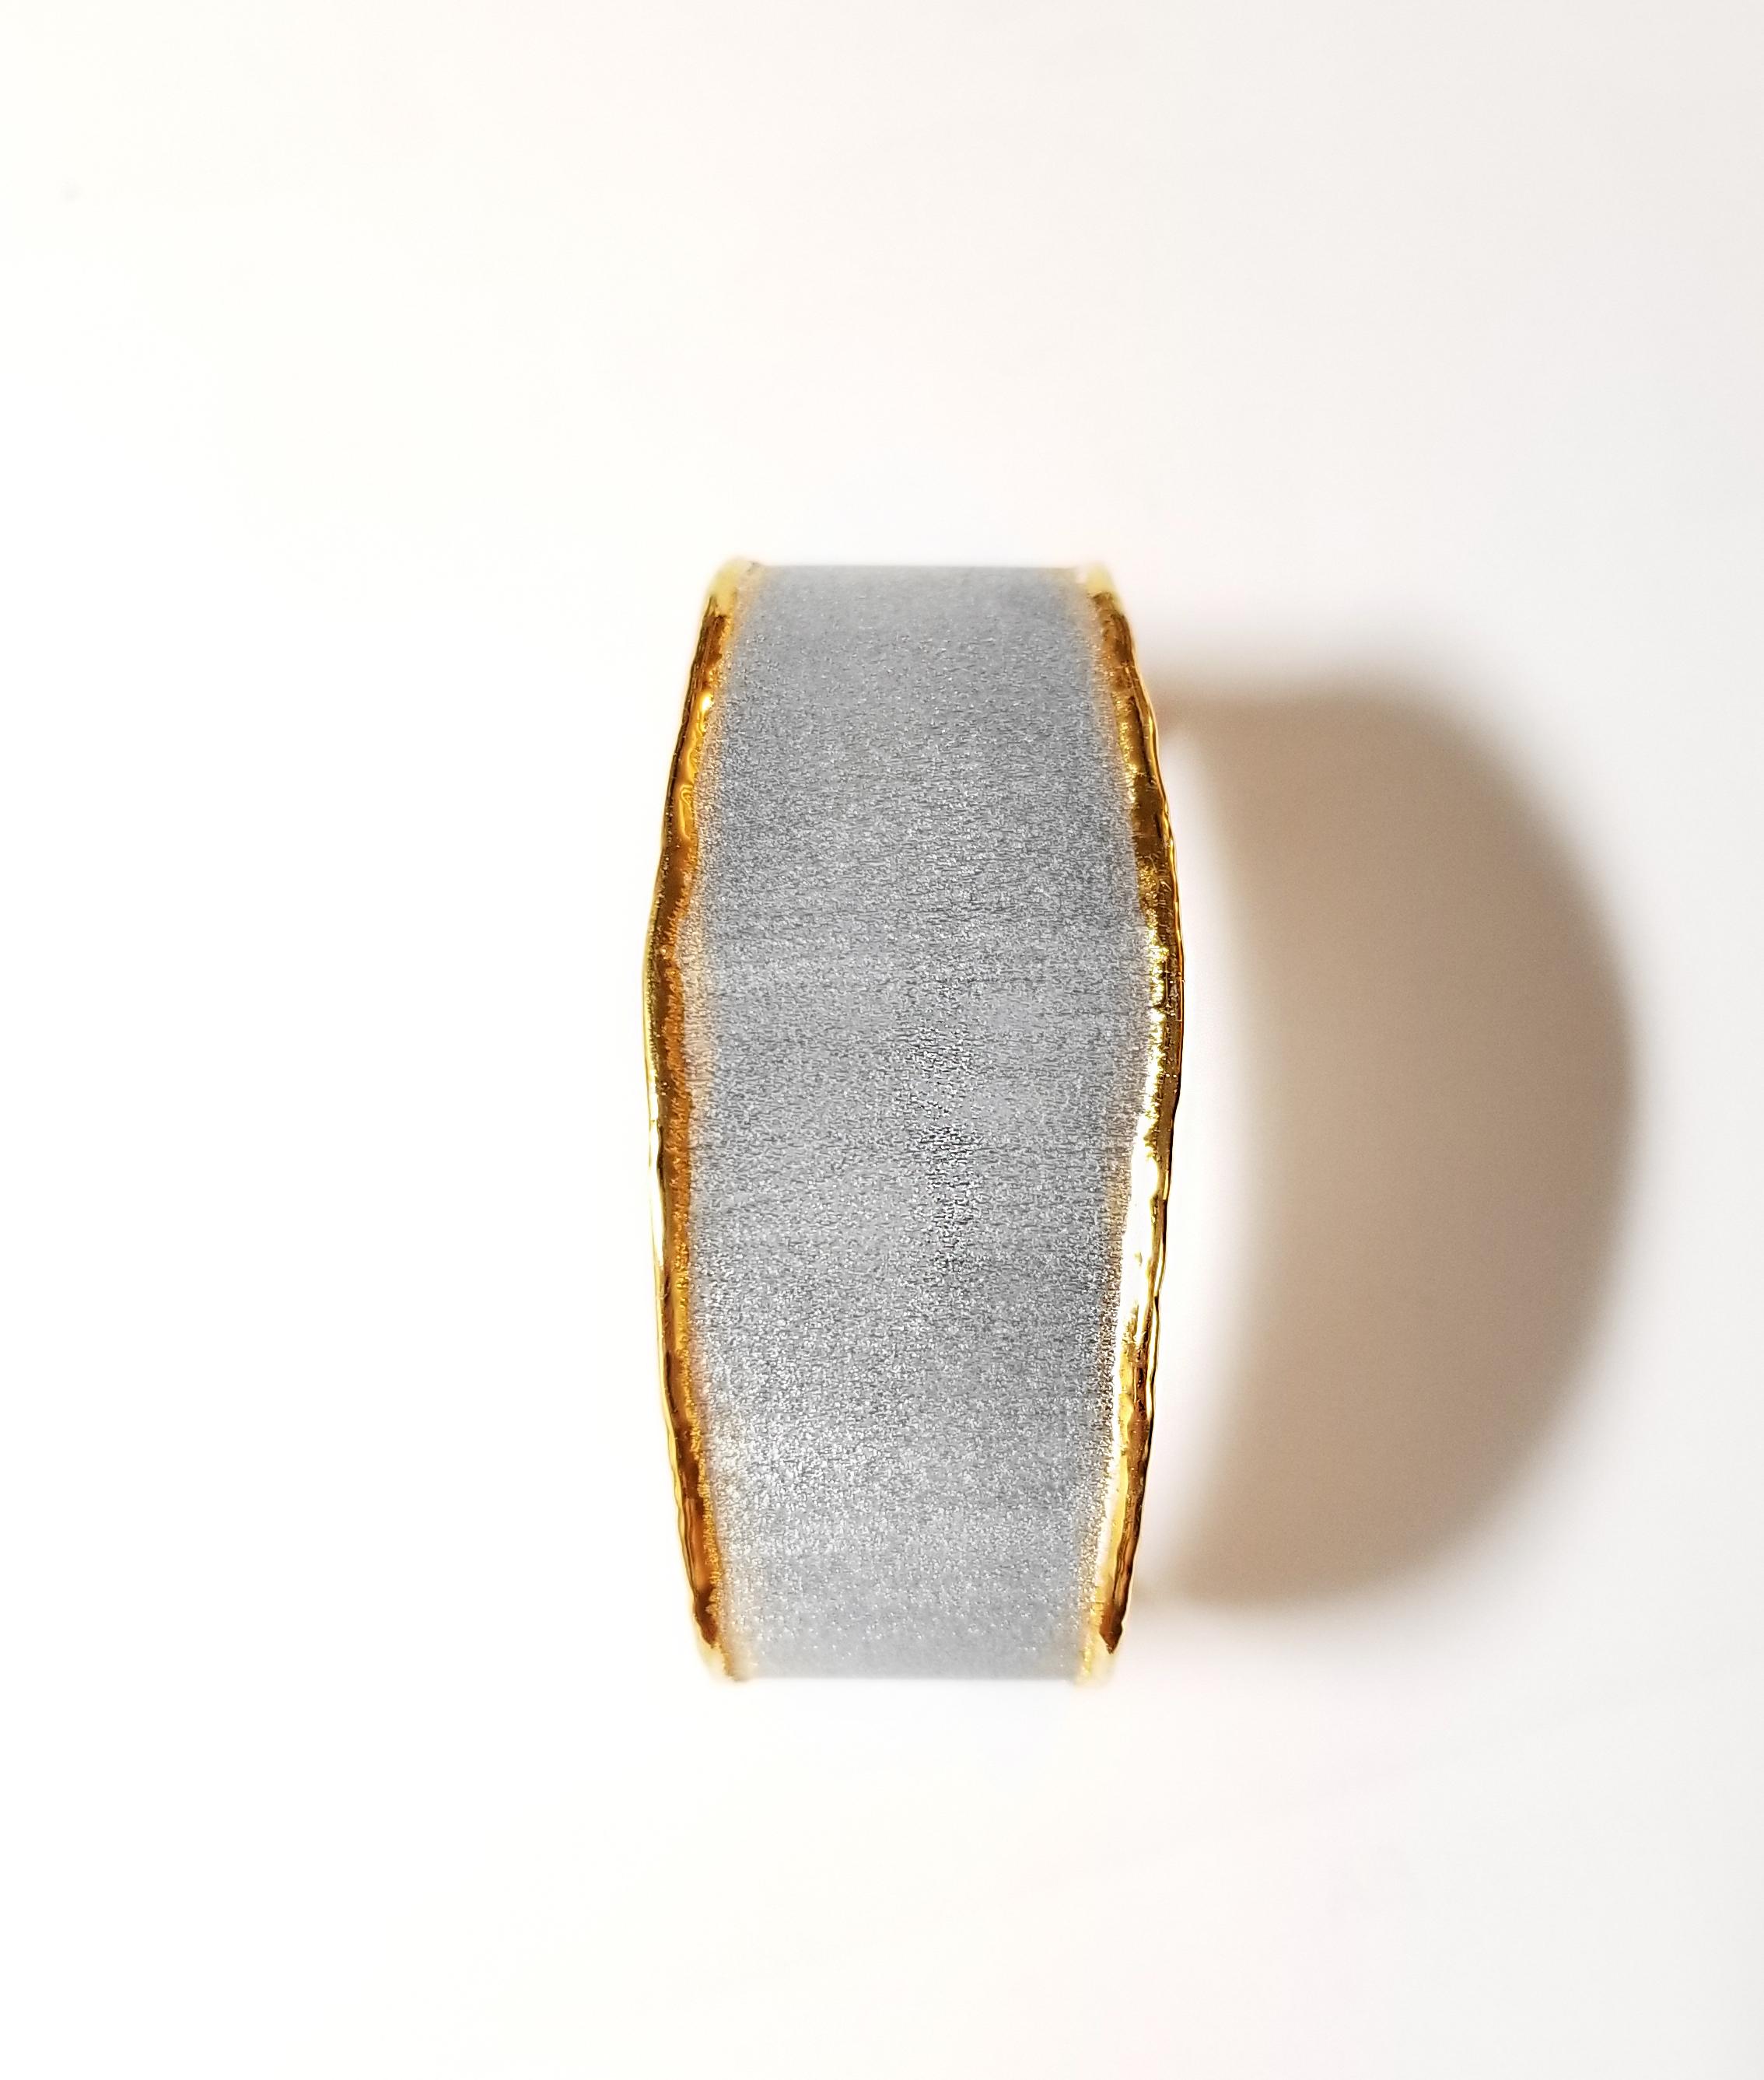 Yianni Creations Midas Collection 100% Handmade Artisan Wide Cuff Bracelet from Fine Silver 950 with a layover of 24 Karat Yellow Gold 3+ microns features unique techniques of craftsmanship - brushed texture and nature-inspired liquid edges. The